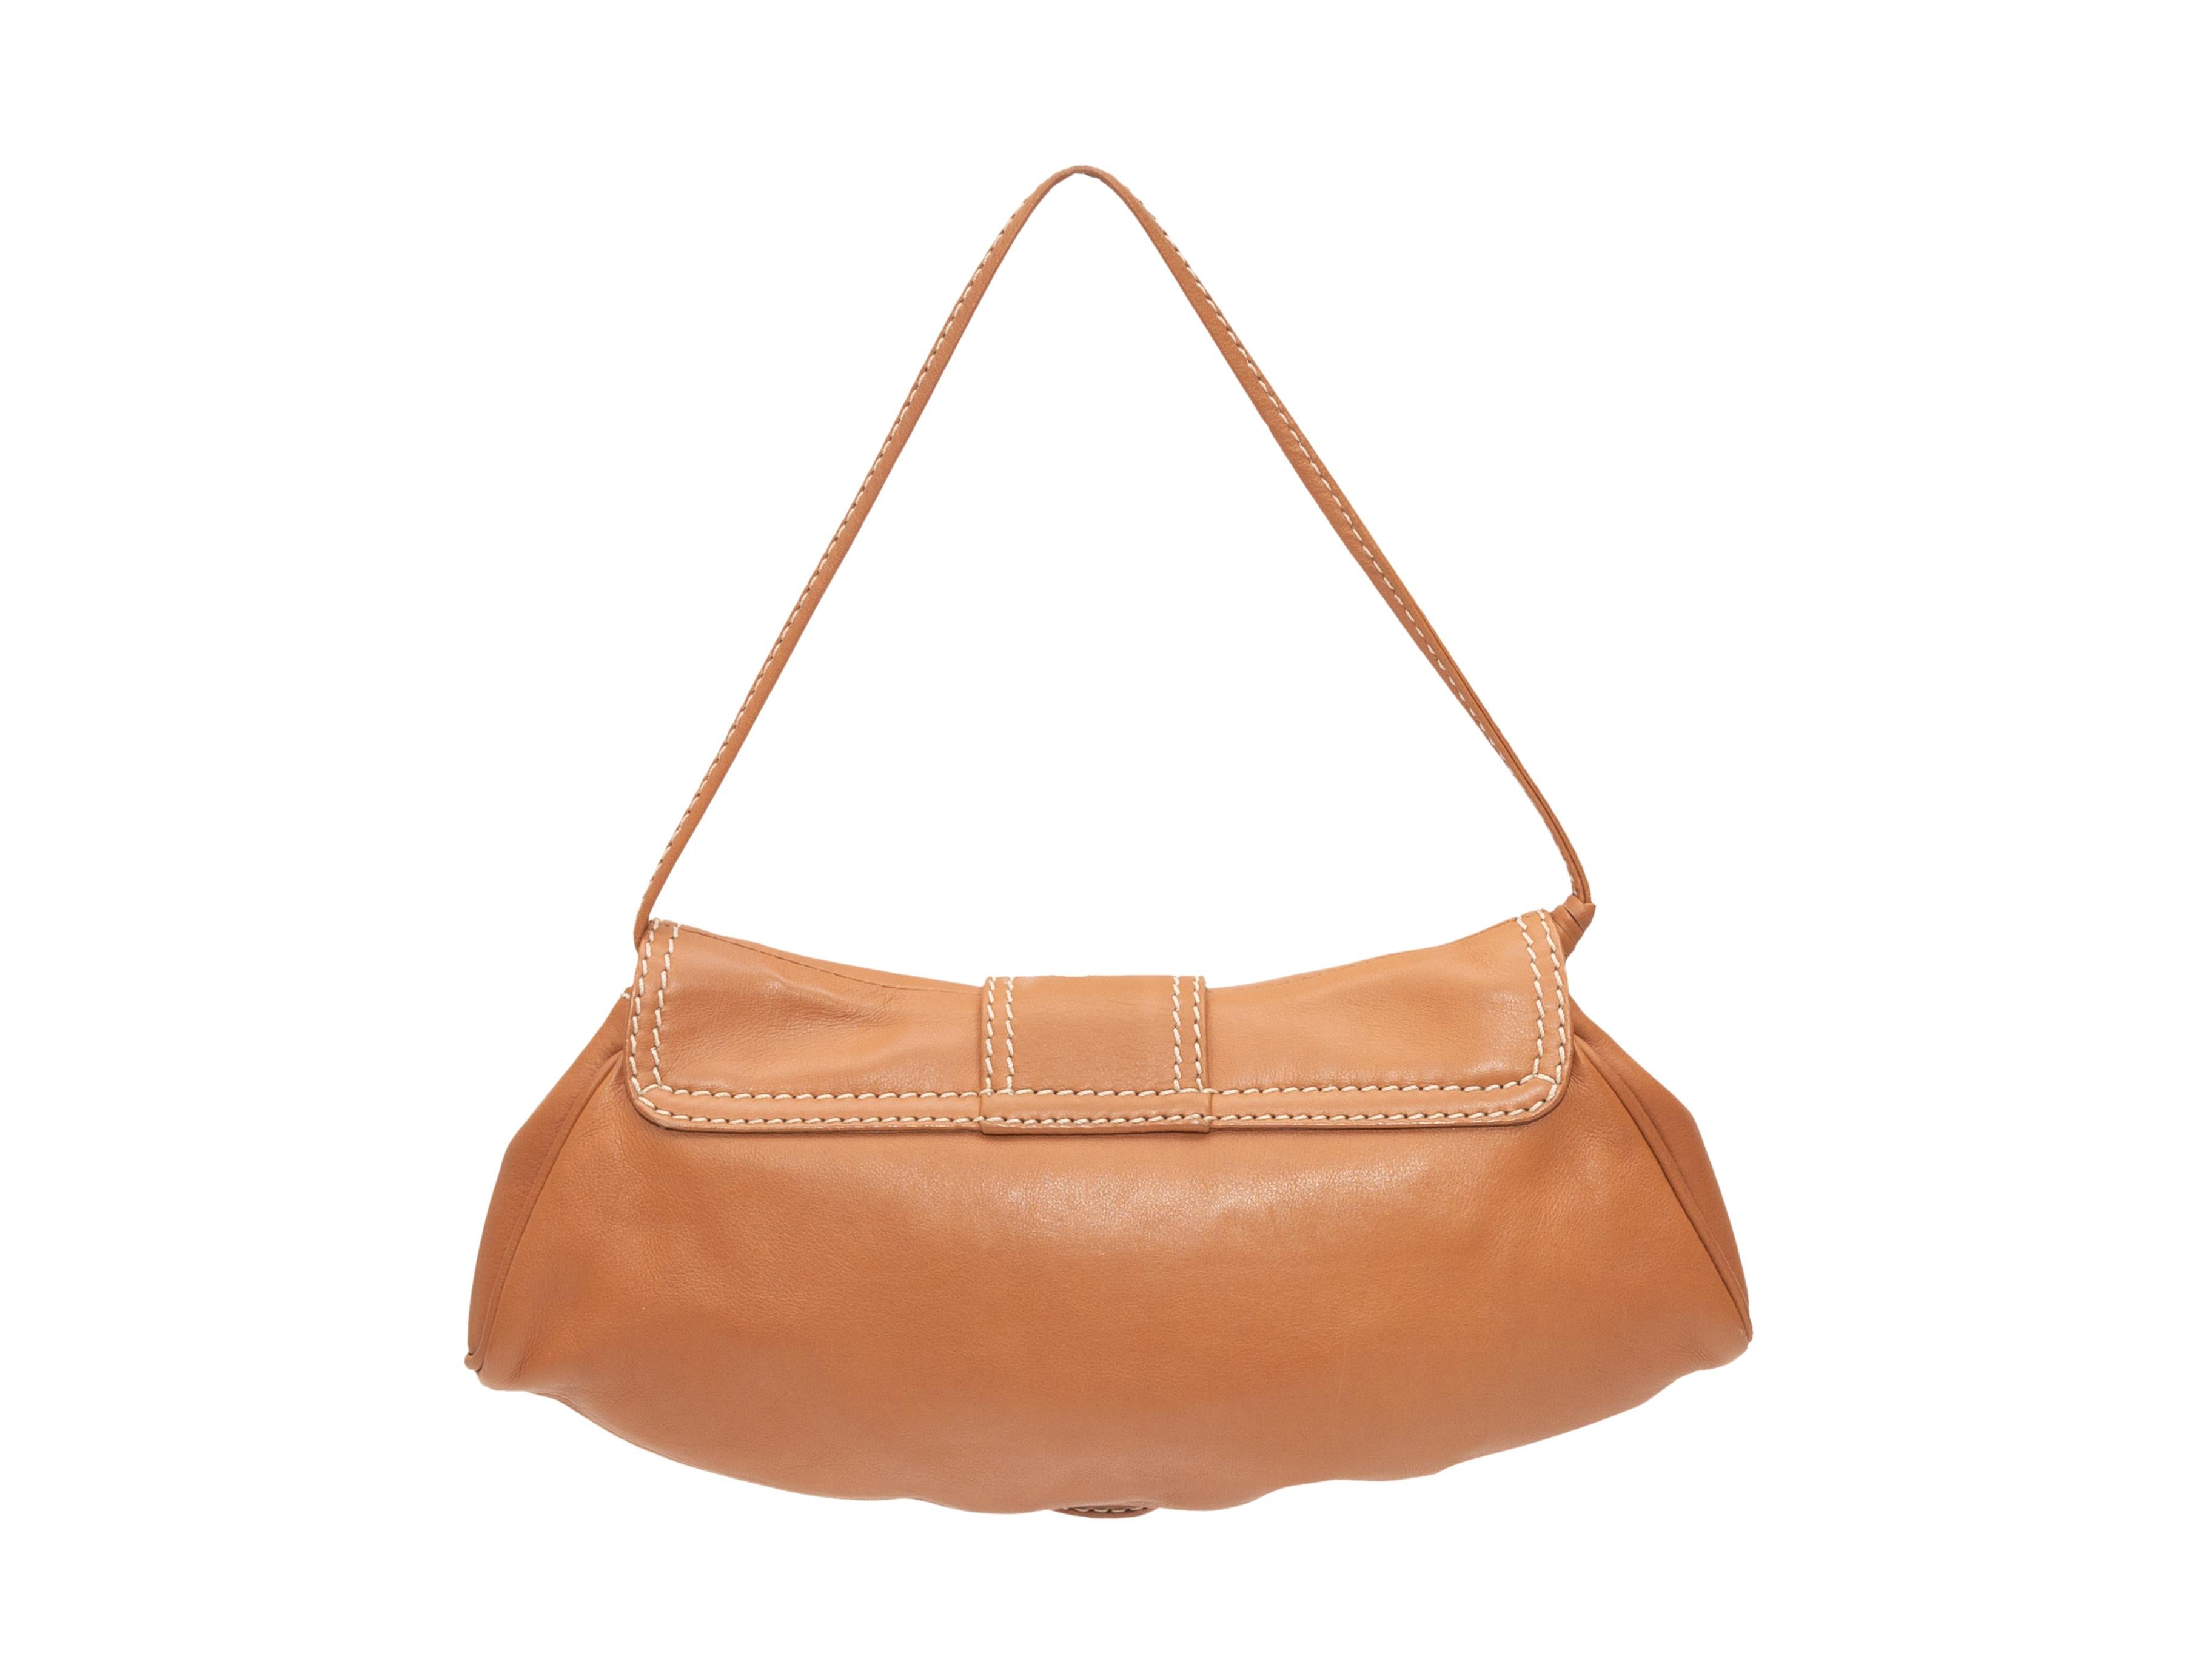 Product details: Tan leather mini flap shoulder bag by Celine. Circa 2004. Gold-tone hardware. Contrast stitching throughout. 10